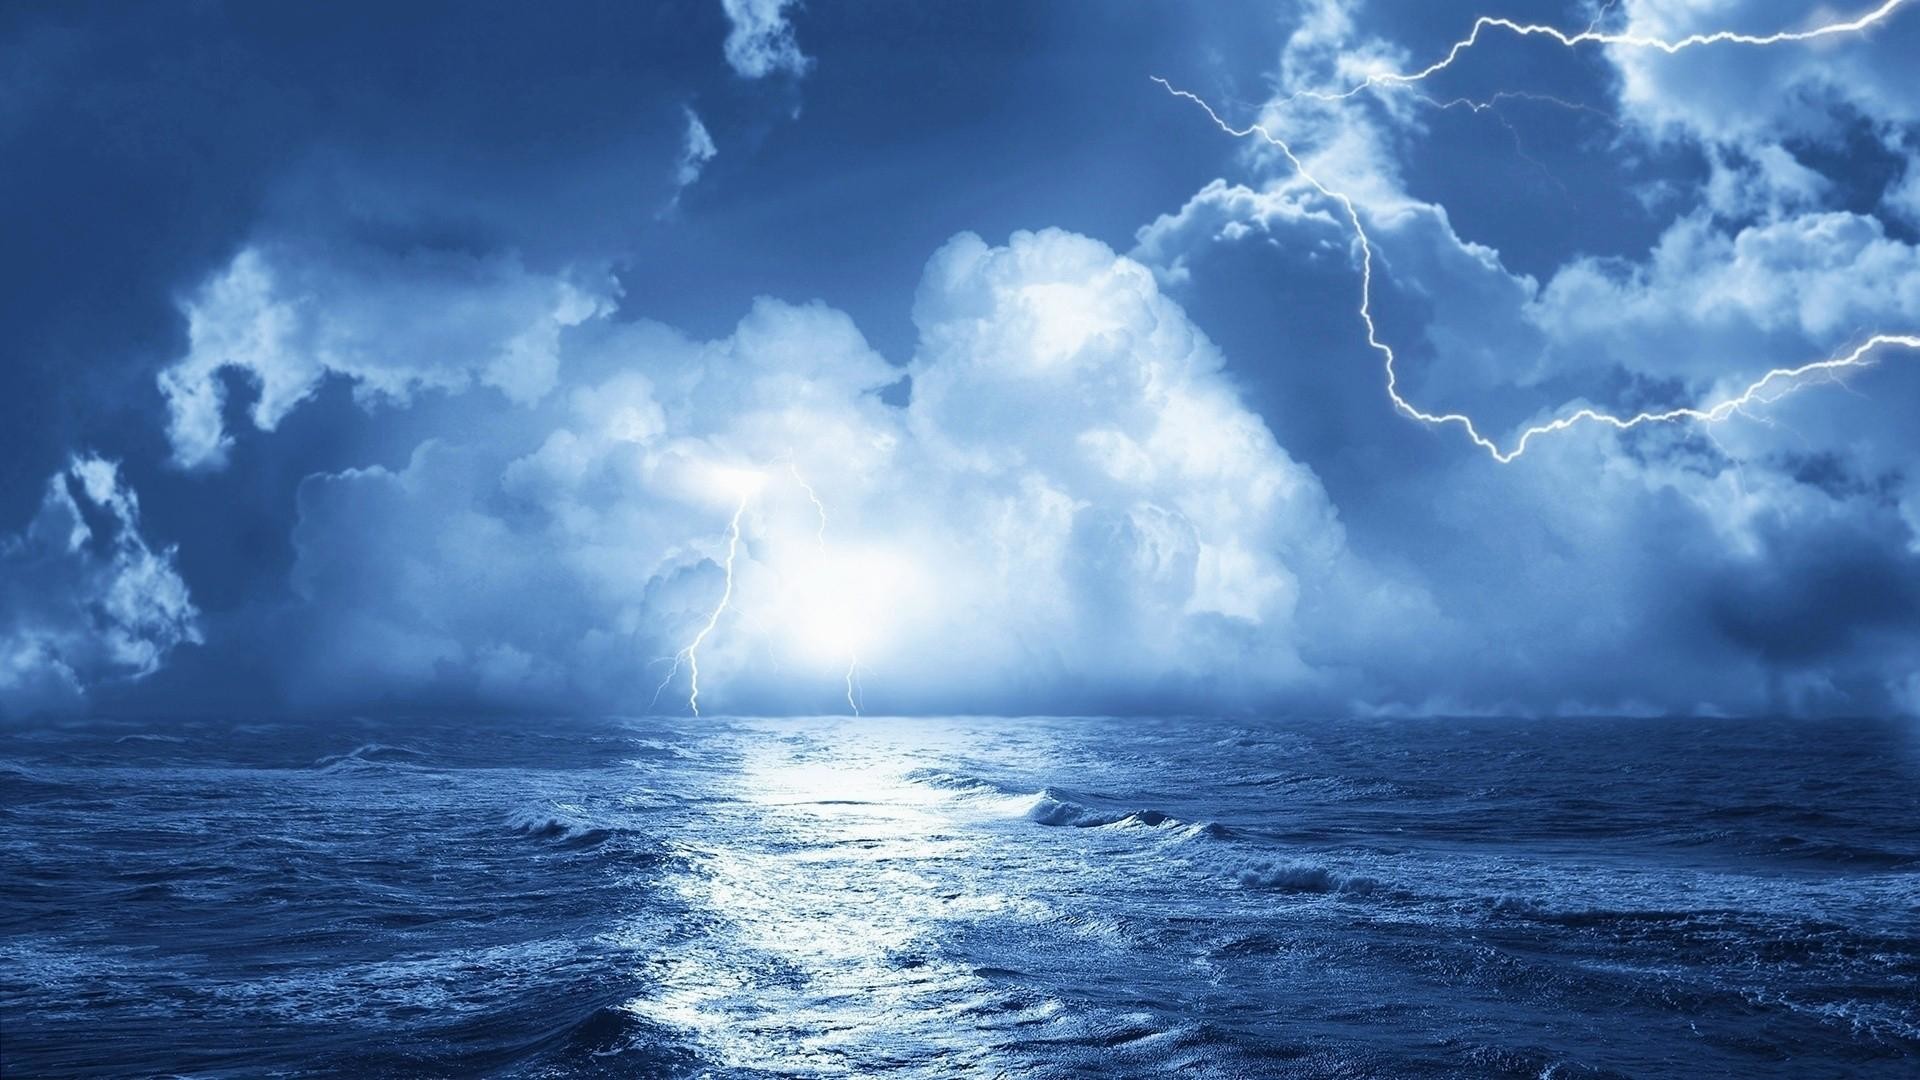 Fish In The Ocean Wallpapers Hd Sea Lightning - Storm Background - HD Wallpaper 